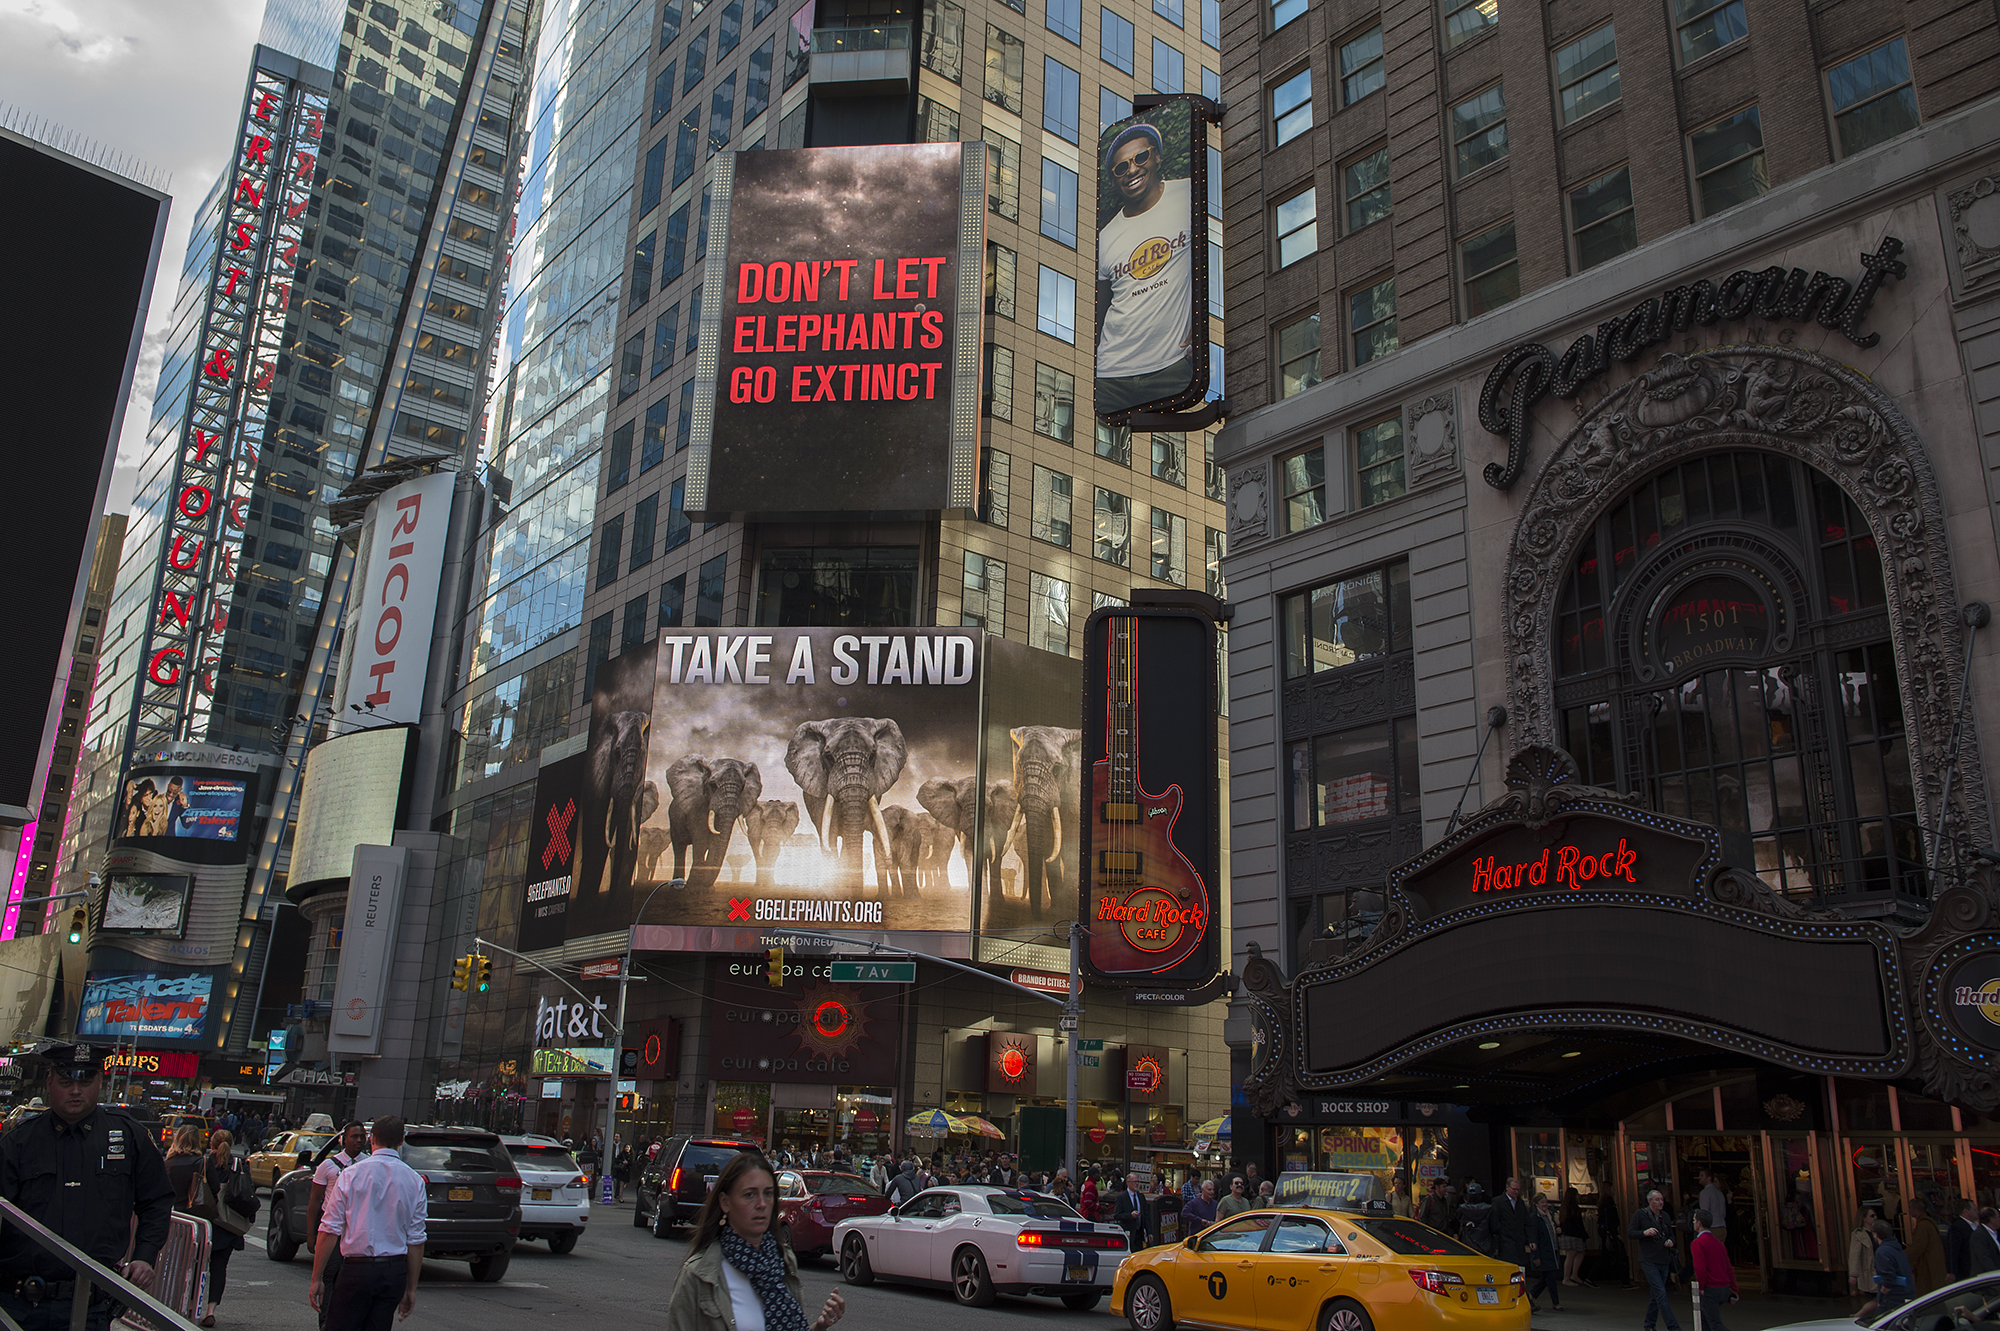 Take A Stand for Elephants at Times Square